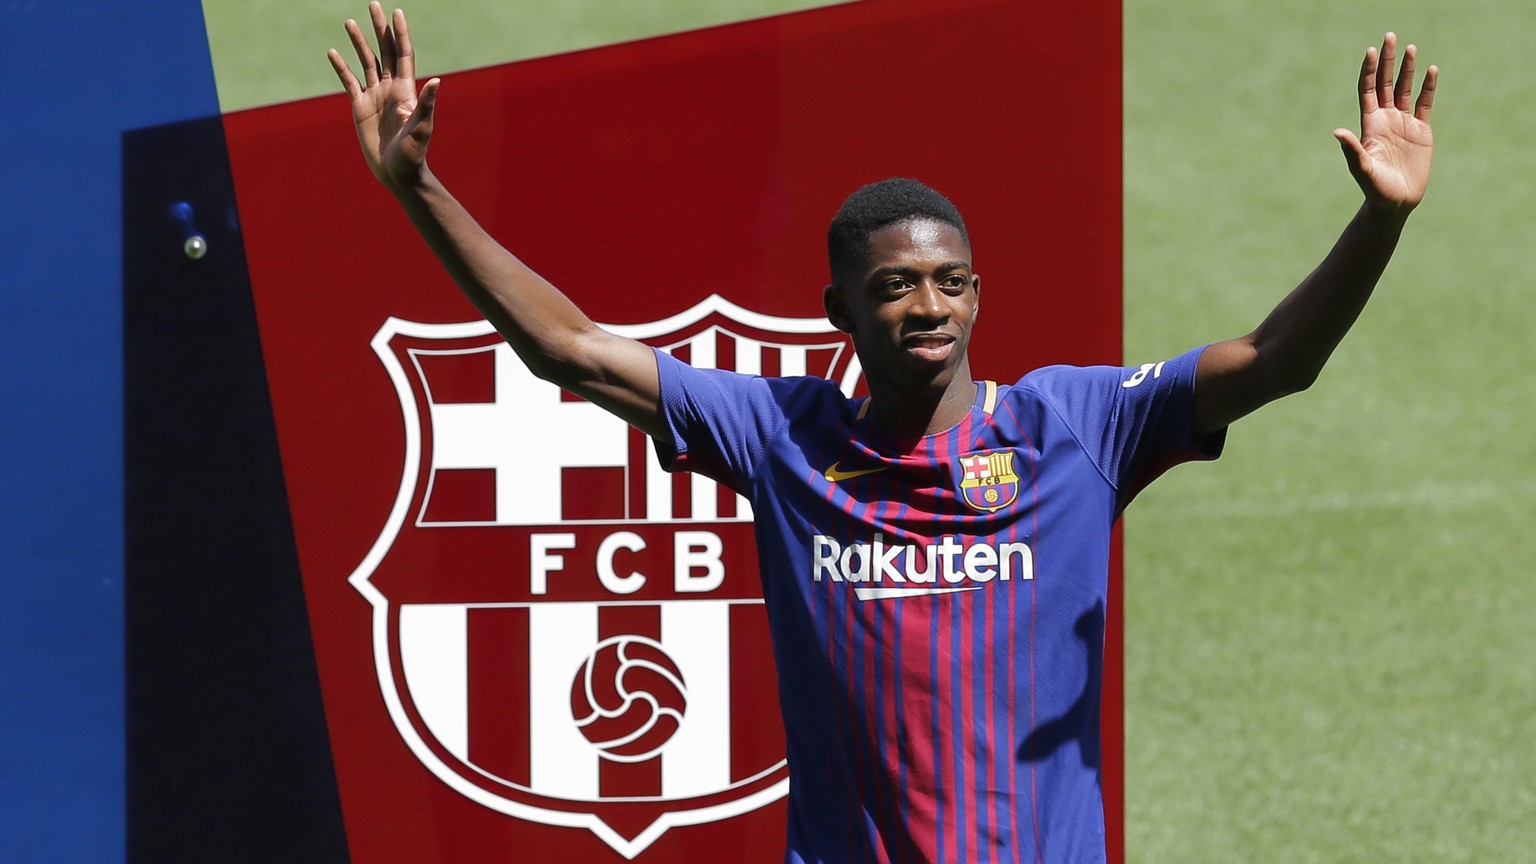 French soccer player Ousmane Dembele gestures during official presentation at the Camp Nou stadium in Barcelona, Spain, Monday, Aug. 28, 2017. Barcelona is shoring up its attack following Neymar's dep ...